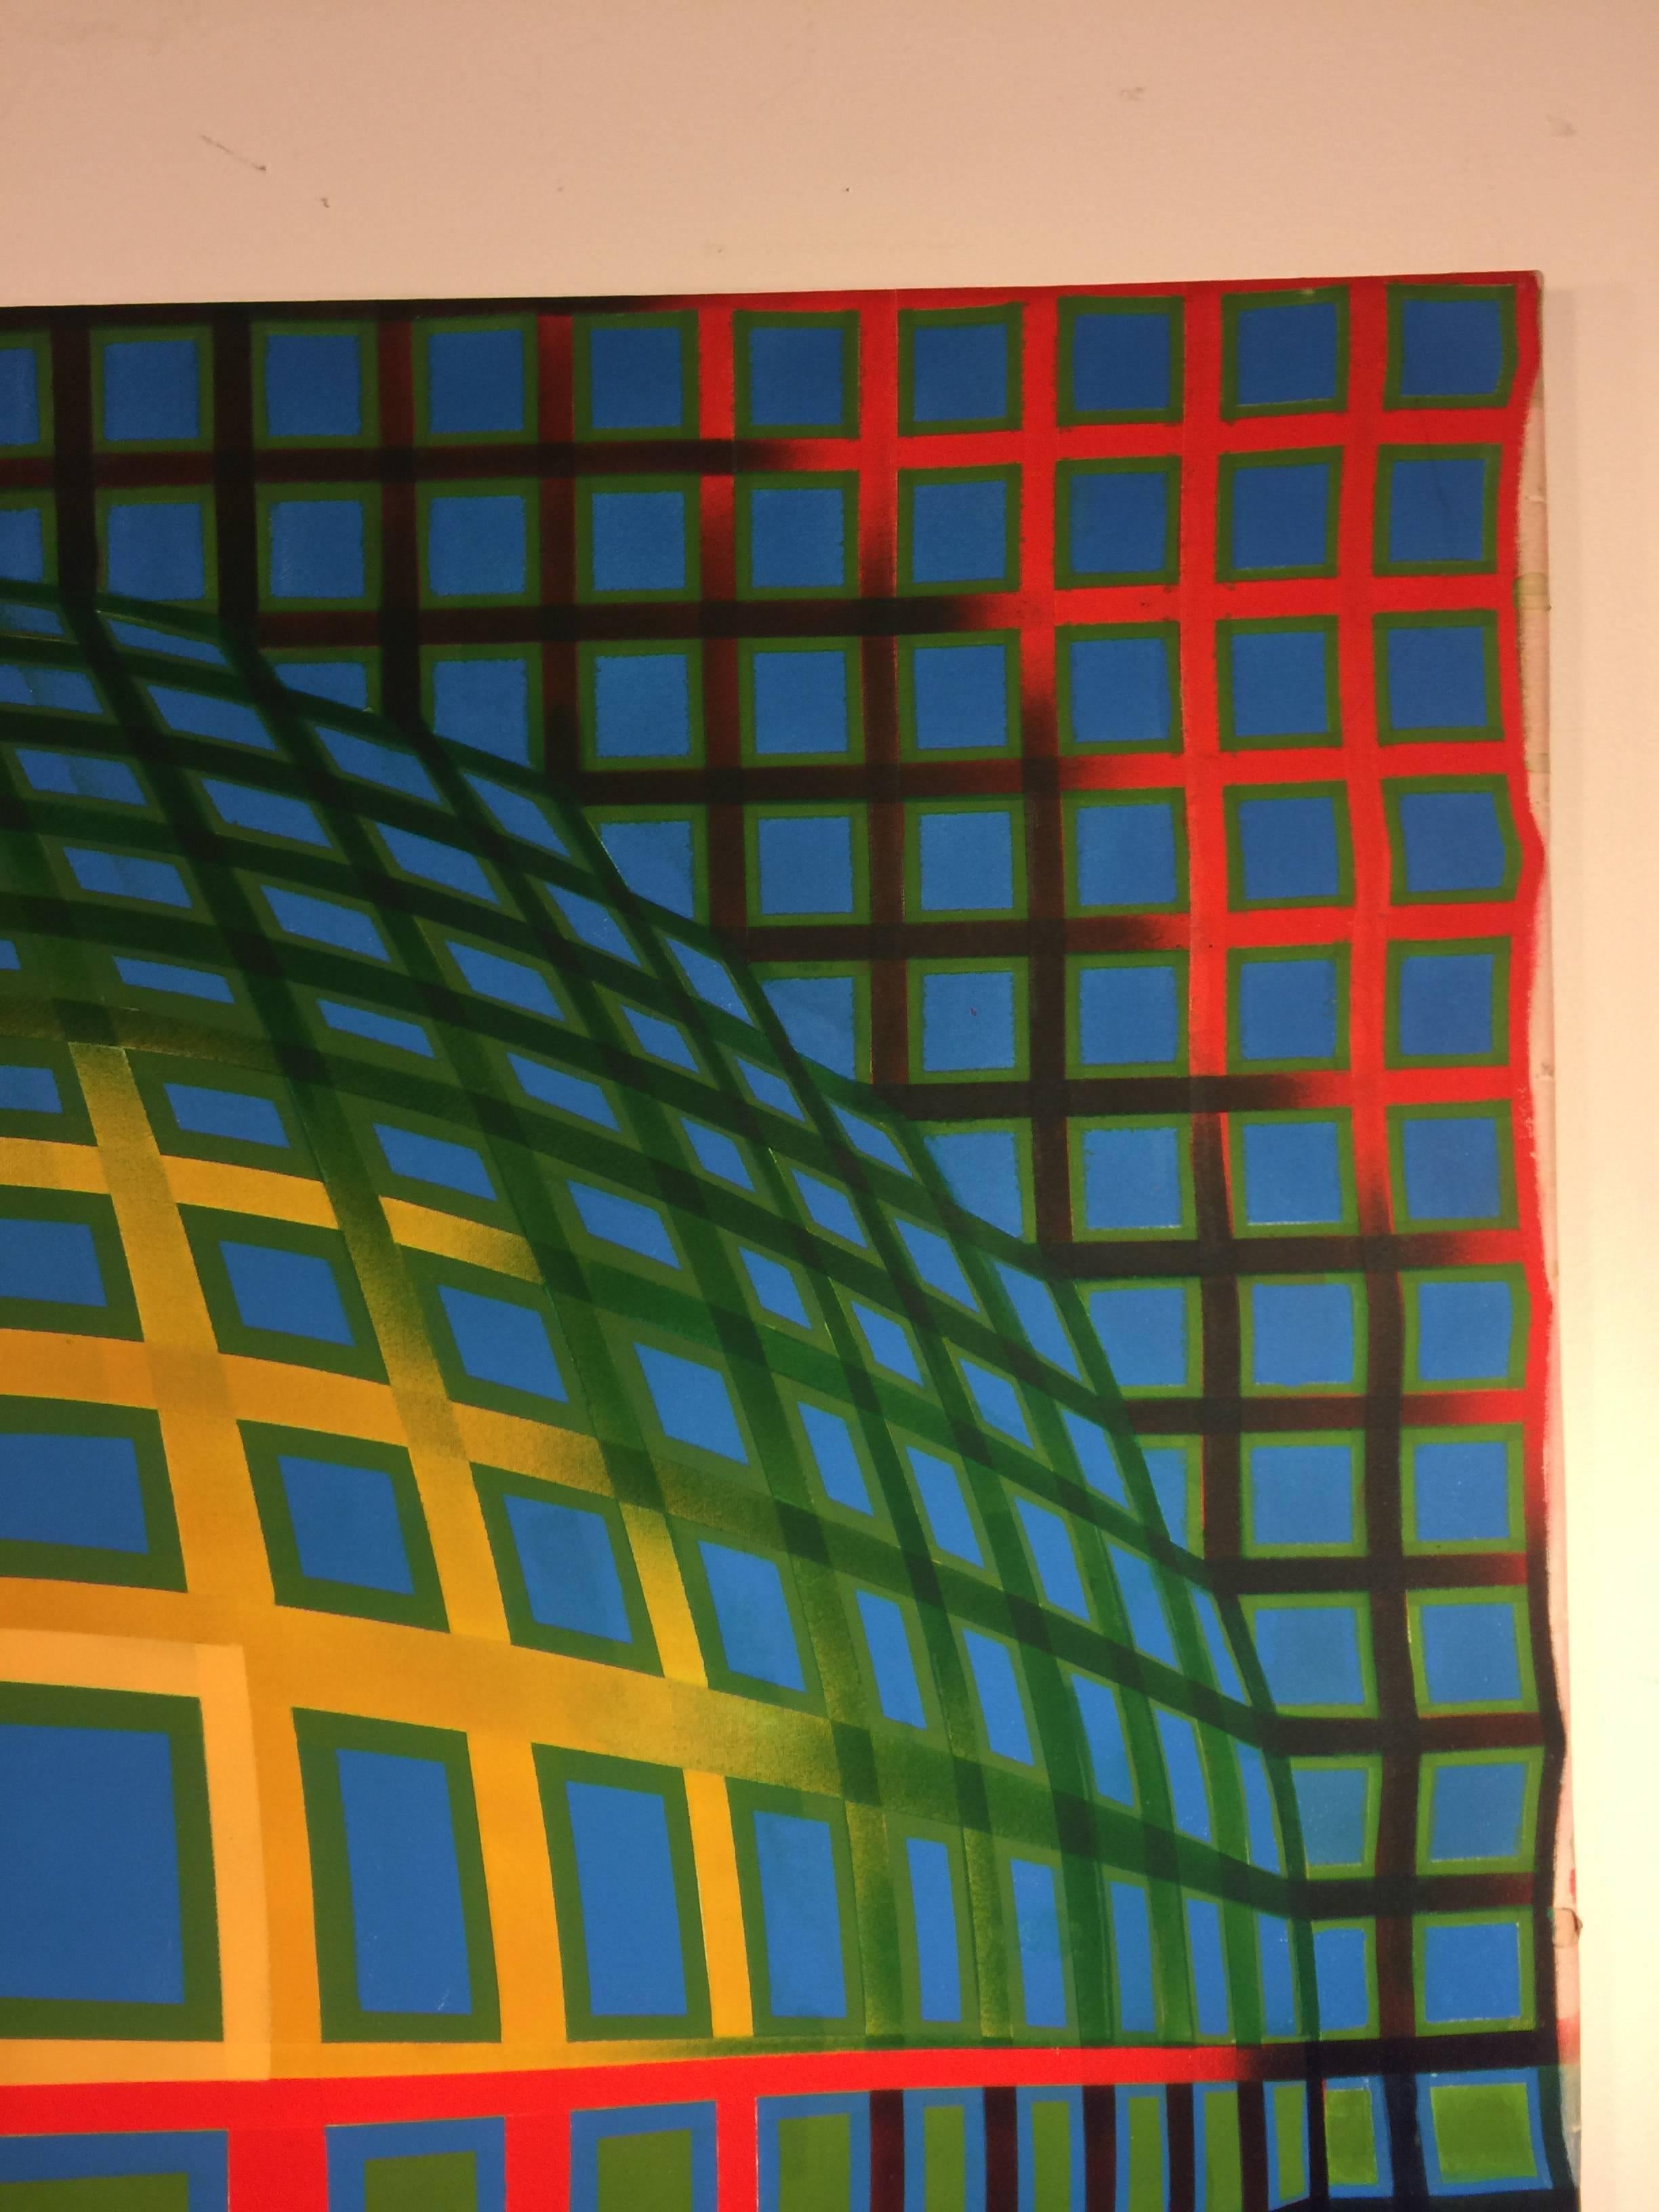 A fantastic, modernistic, Op art oil on canvas with bright colors in the manner of Victor Vasarely, circa 1970.